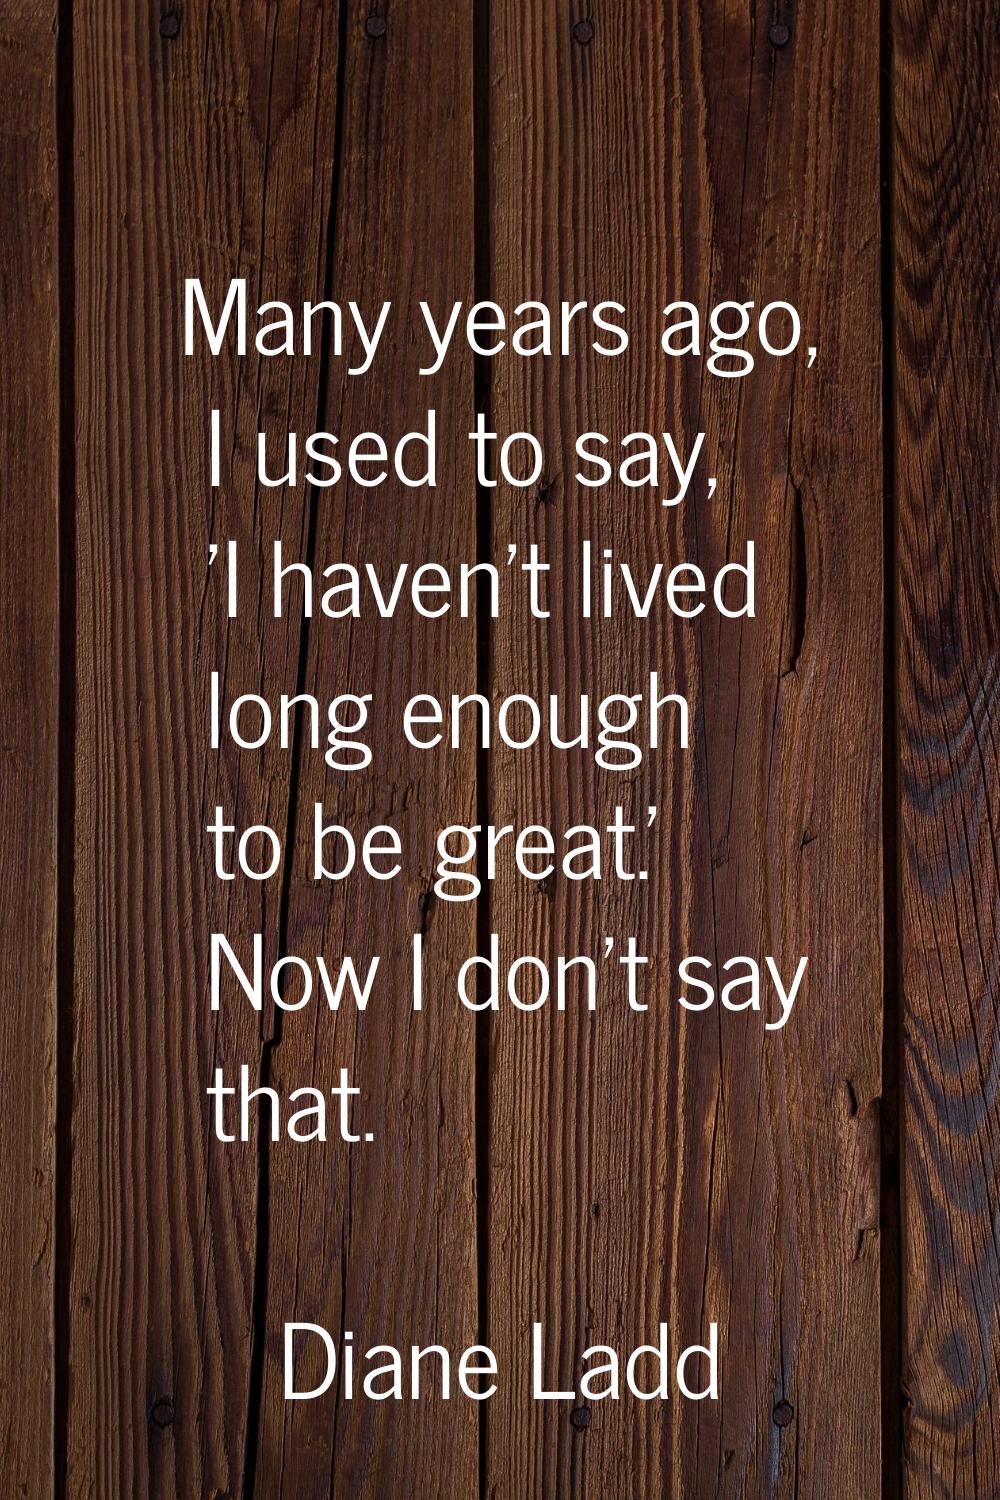 Many years ago, I used to say, 'I haven't lived long enough to be great.' Now I don't say that.